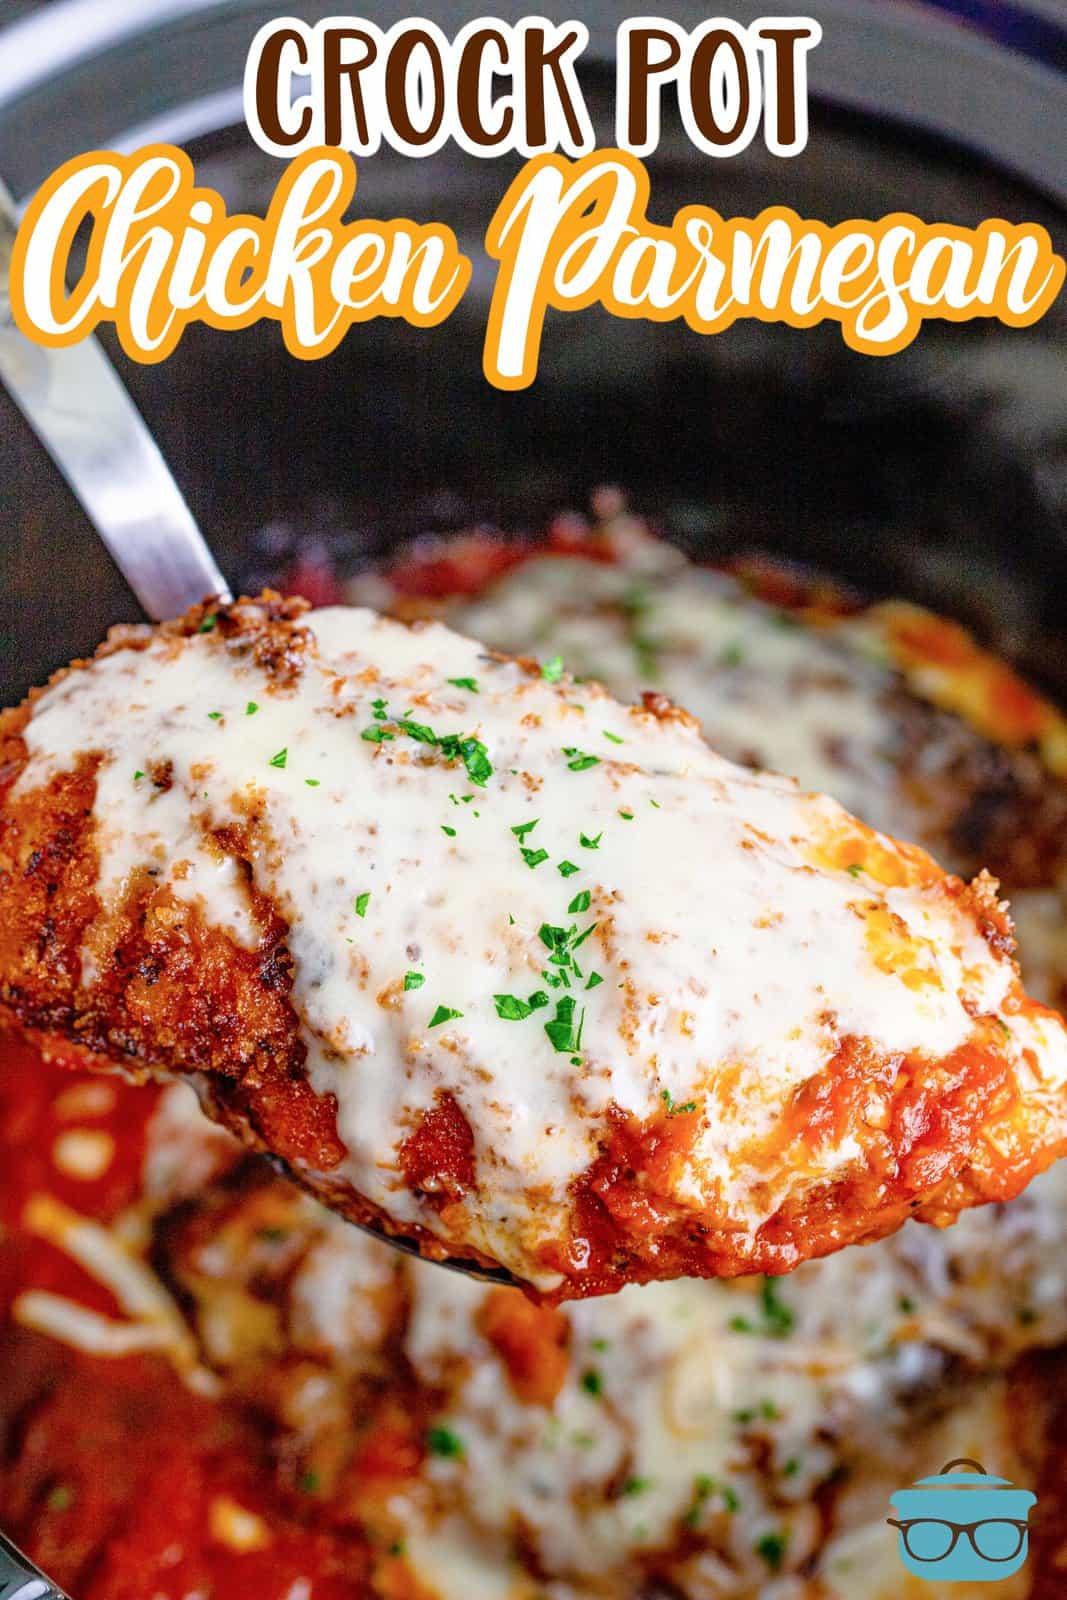 Photo of Crock Pot Chicken Parmesan in a crock pot with a serving on a spoon to be served - by The Country Cook